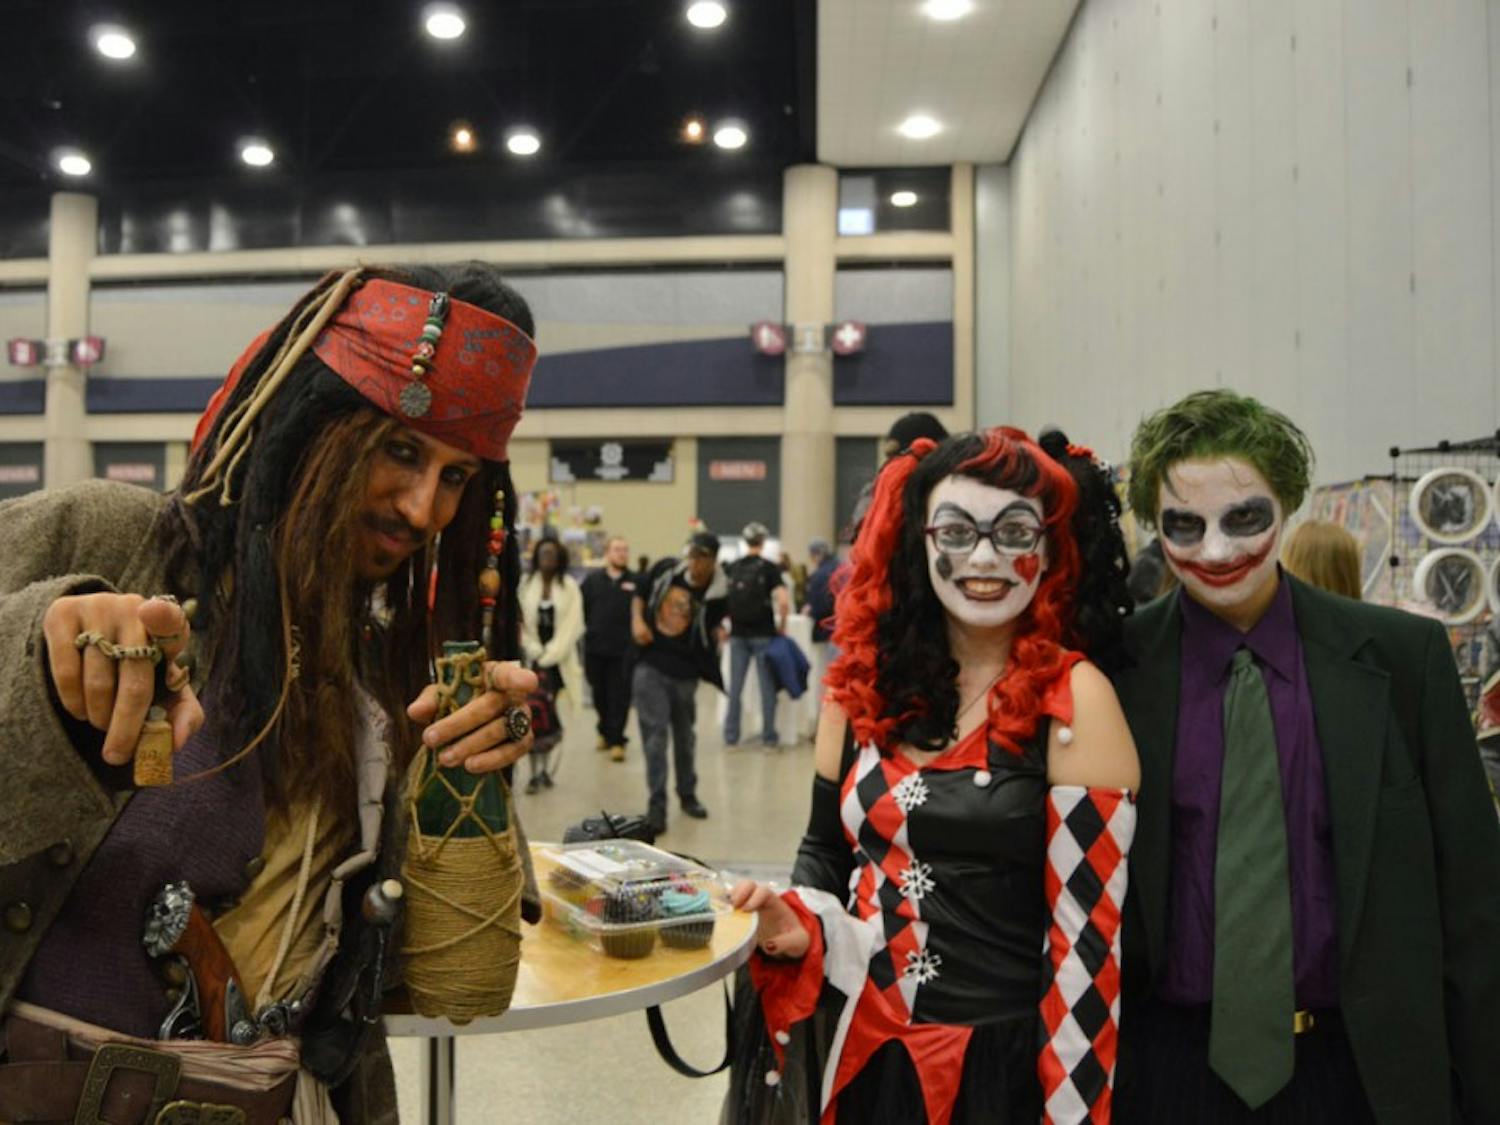 A group of cosplayers consisting of a Joker, a Harley Quinn and a Captain Jack Sparrow enjoys Buffalo Comic Con, which moved this year to the Buffalo Convention Center as part of a two-day event Oct. 17-18. The event was hugely popular, with multiple different events held each day including meet-and-greets with different comic artists, cosplay contests and more.